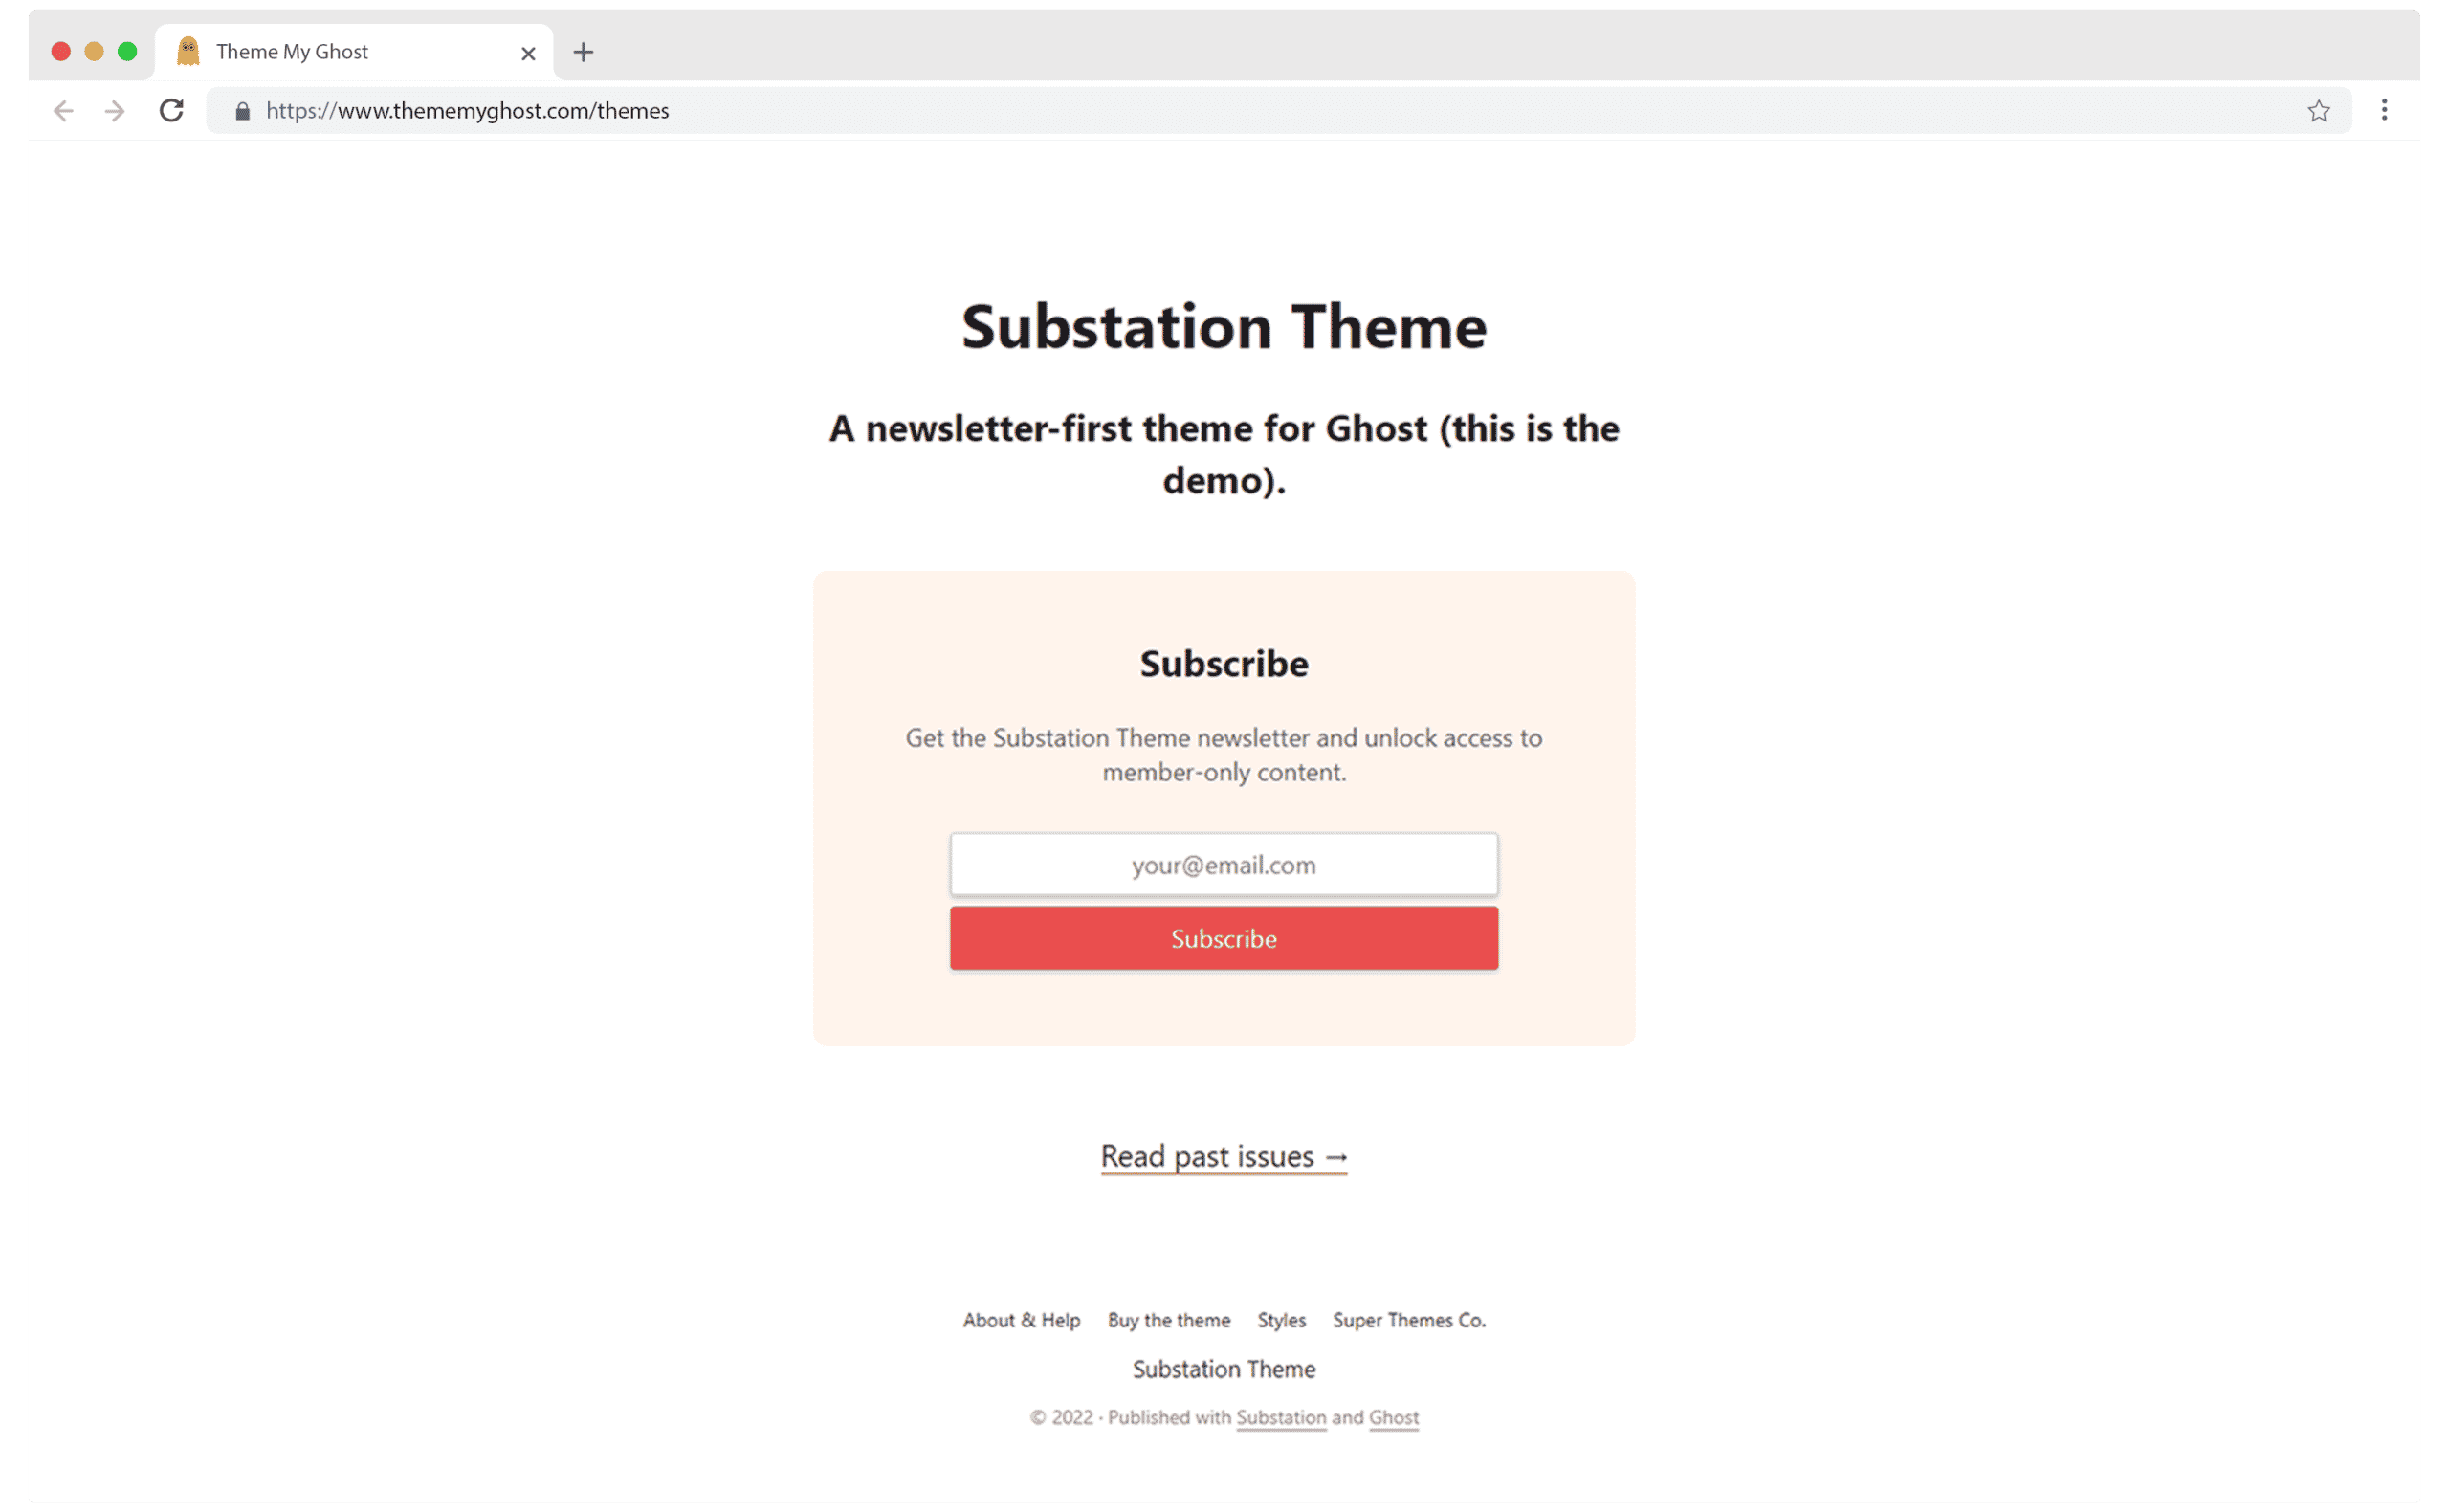 Substation - Premium Ghost theme as a Substation alternative on Ghost by Super Themes Co Dan Rowden